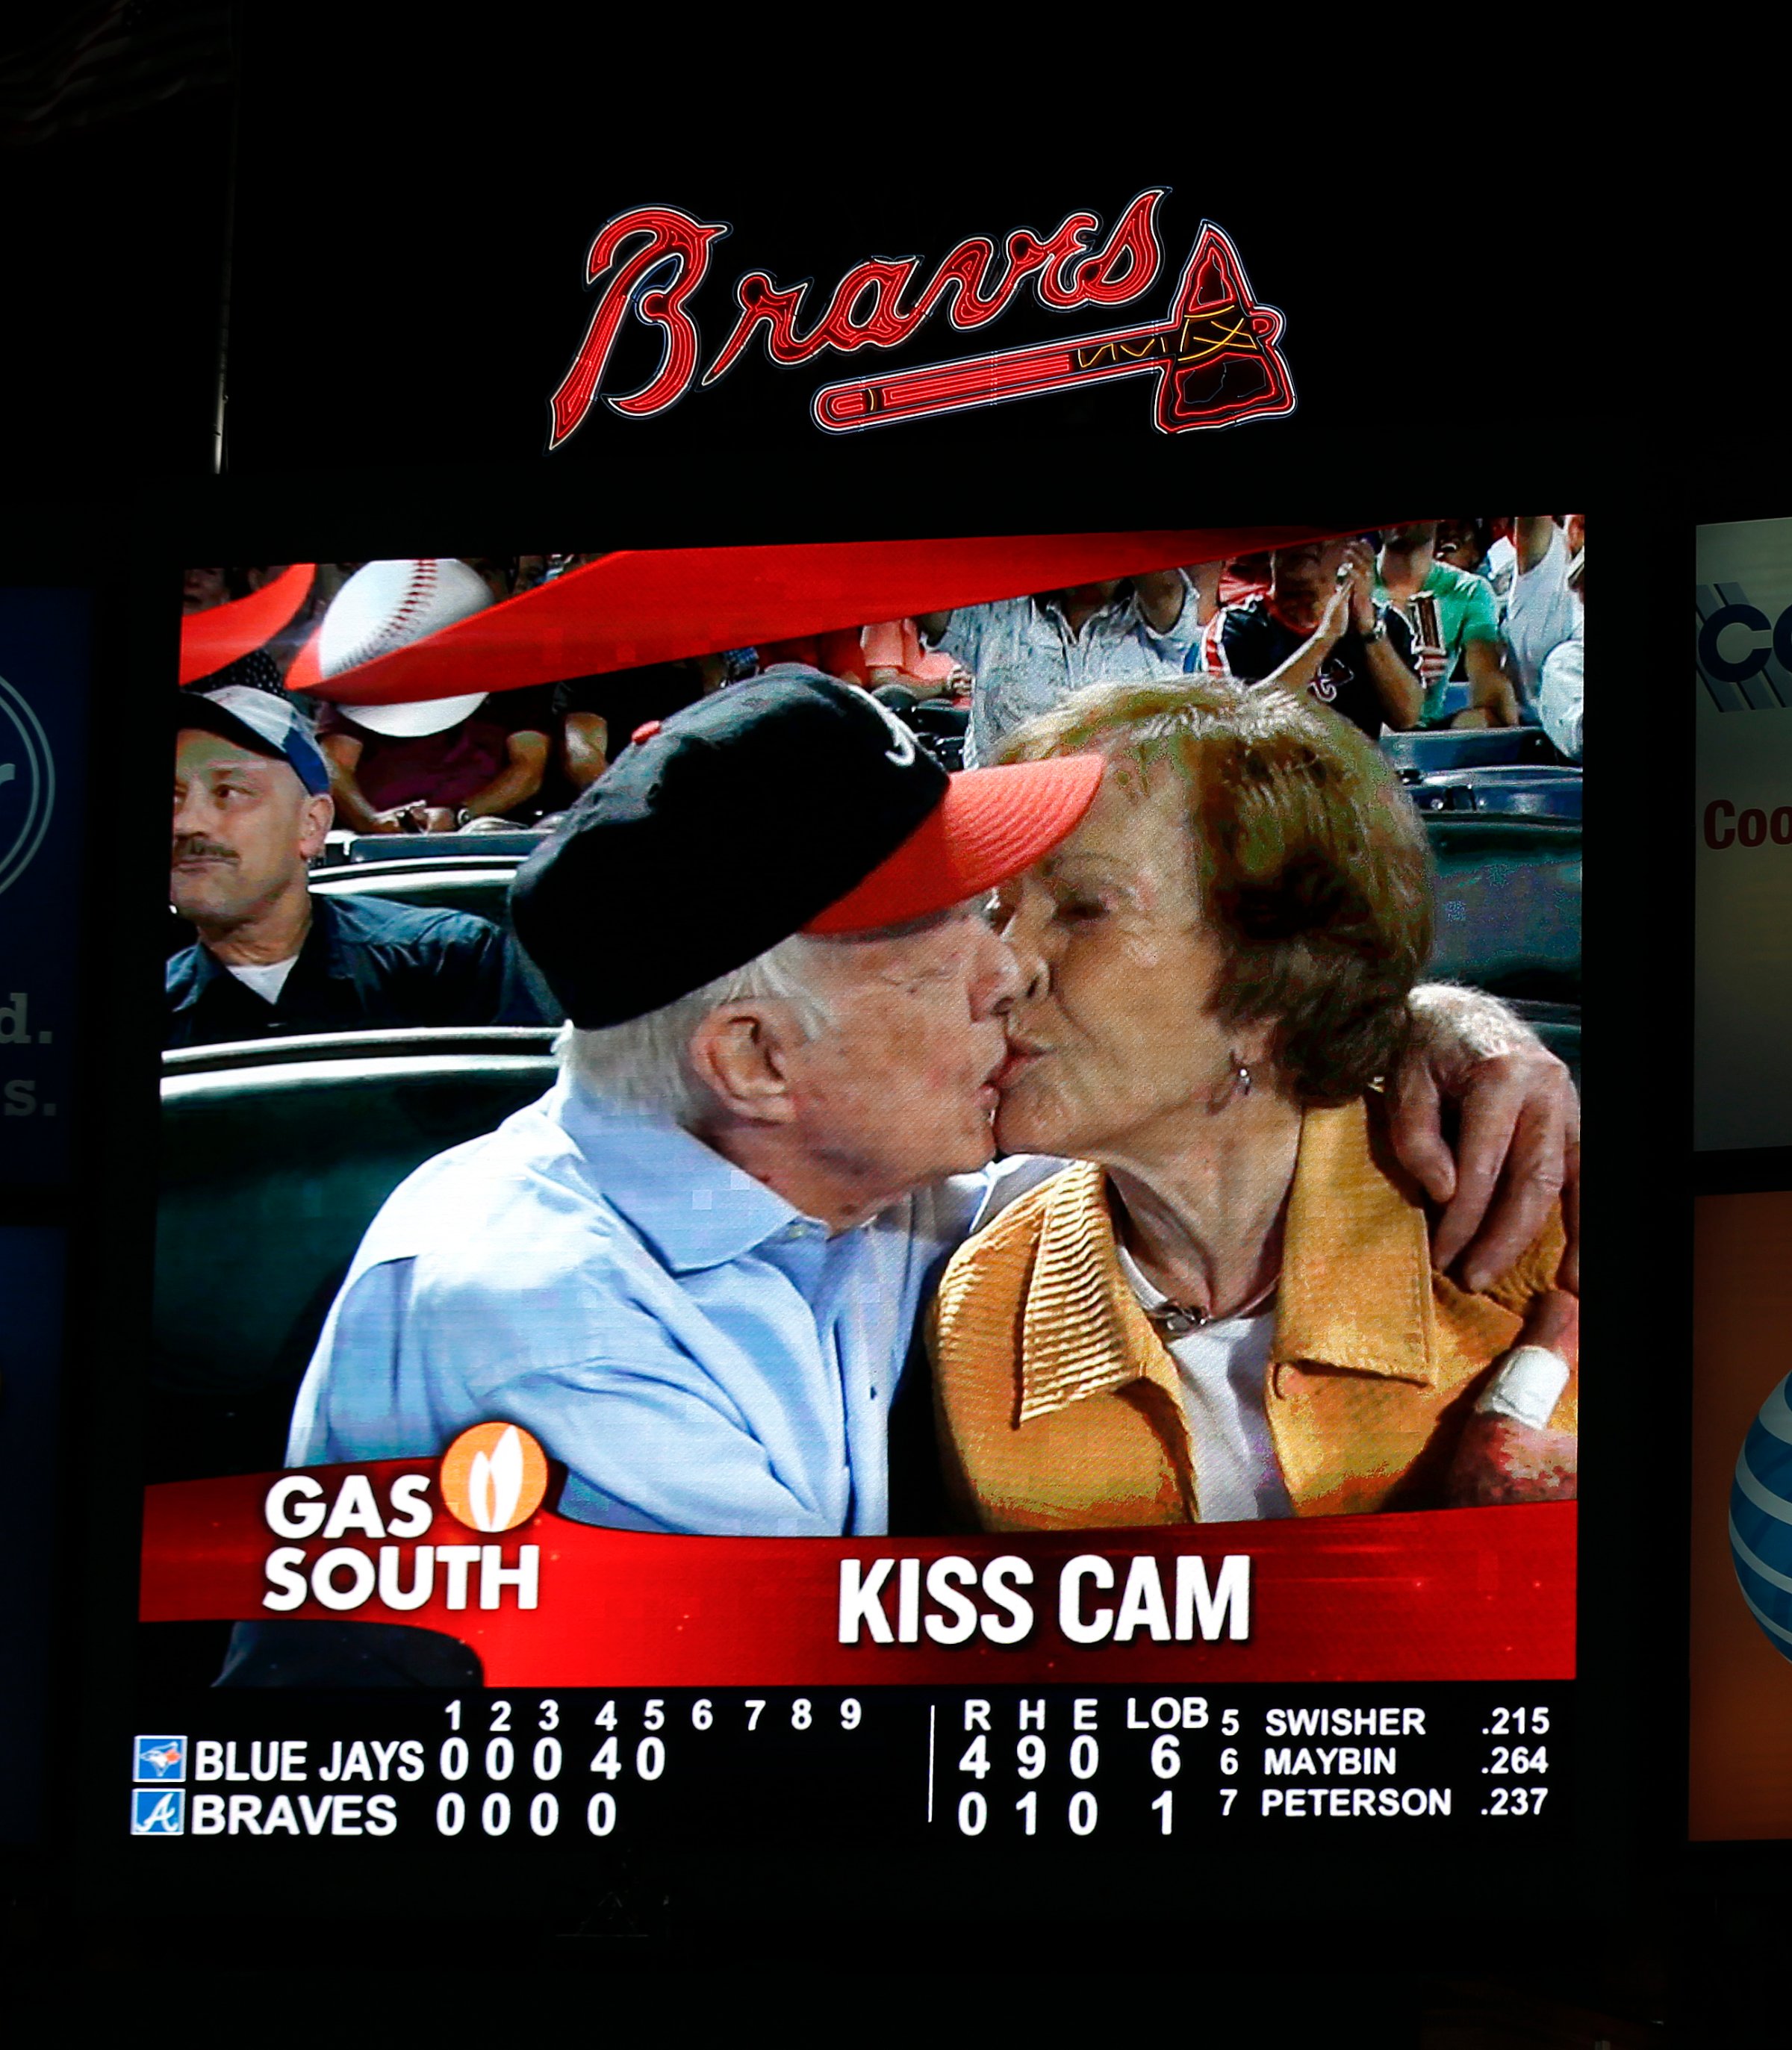 Jimmy Carter kisses his wife, Rosalynn, on the "Kiss Cam" during a baseball game between the Atlanta Braves and the Toronto Blue Jays in Atlanta on Sept. 17, 2015.